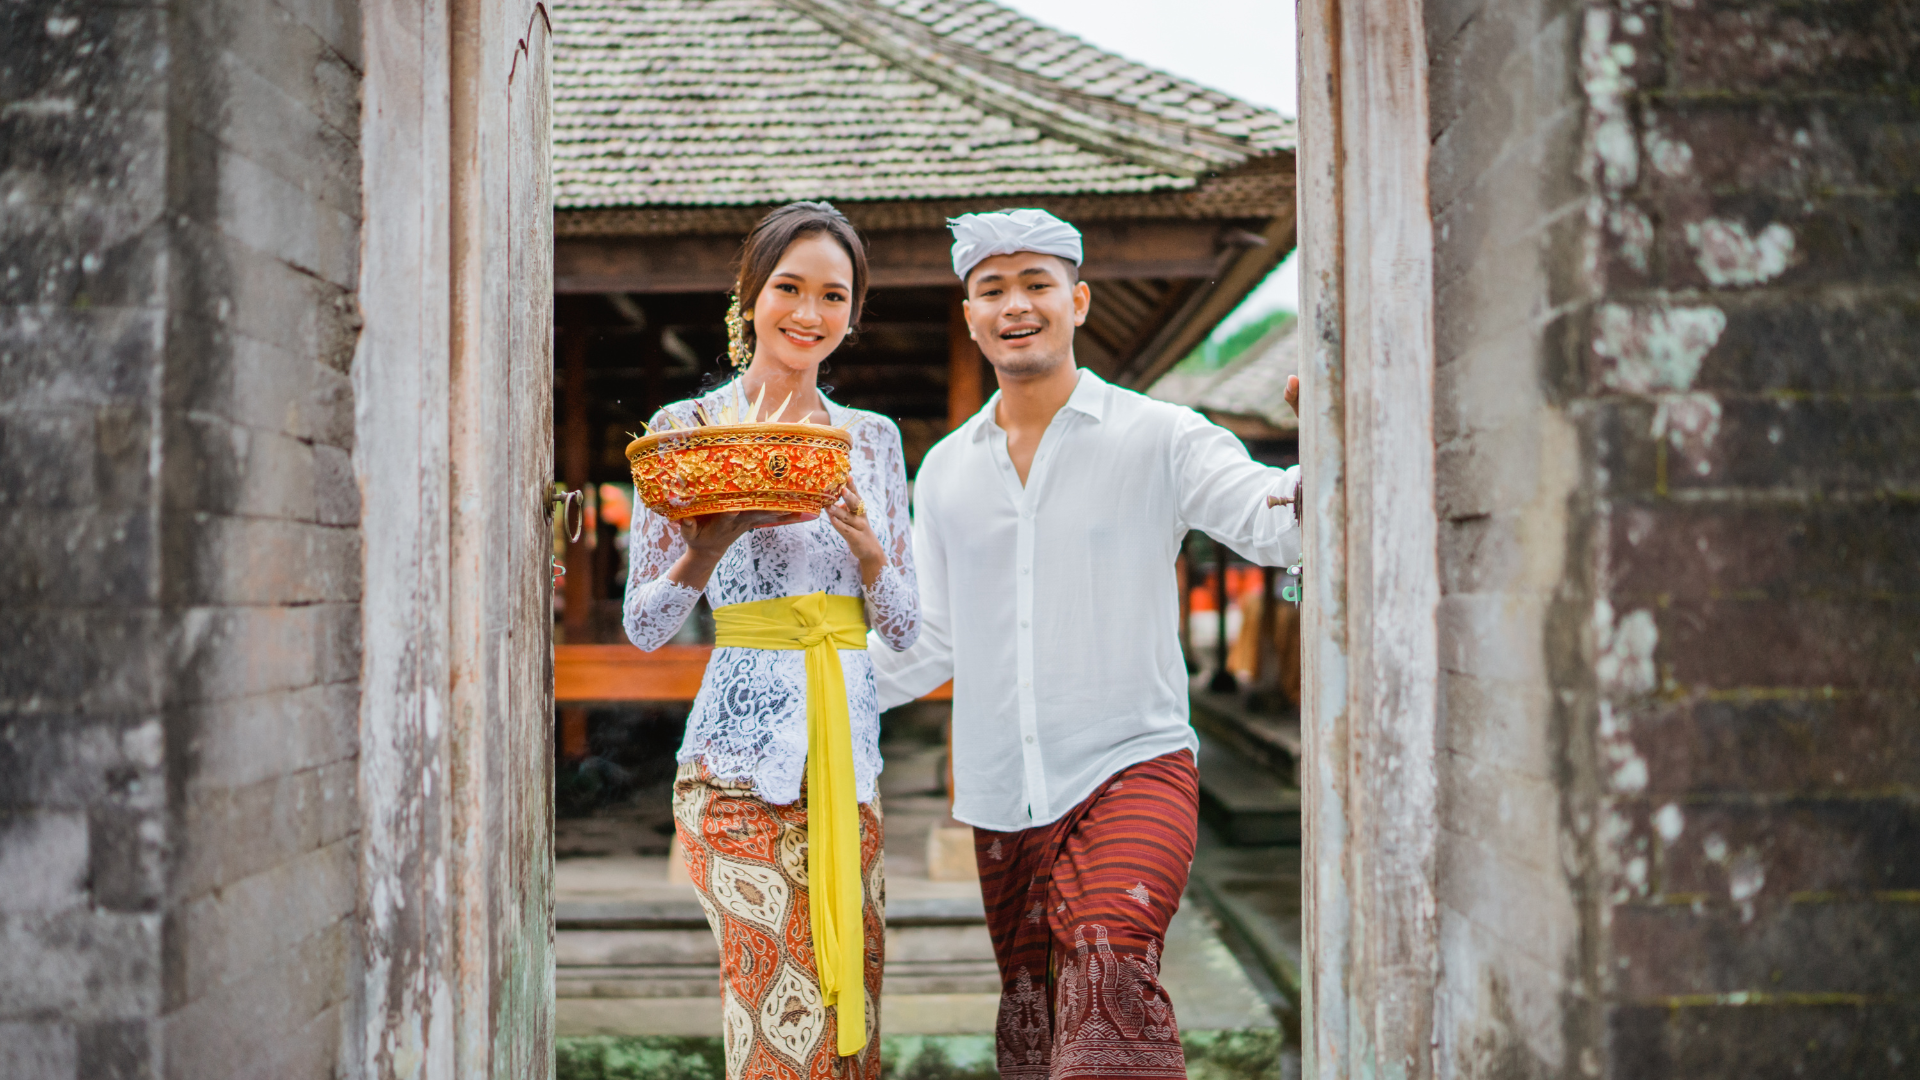 Travel to Bali Advice - 6 Tips - YOEXPLORE - Balinese Outfit